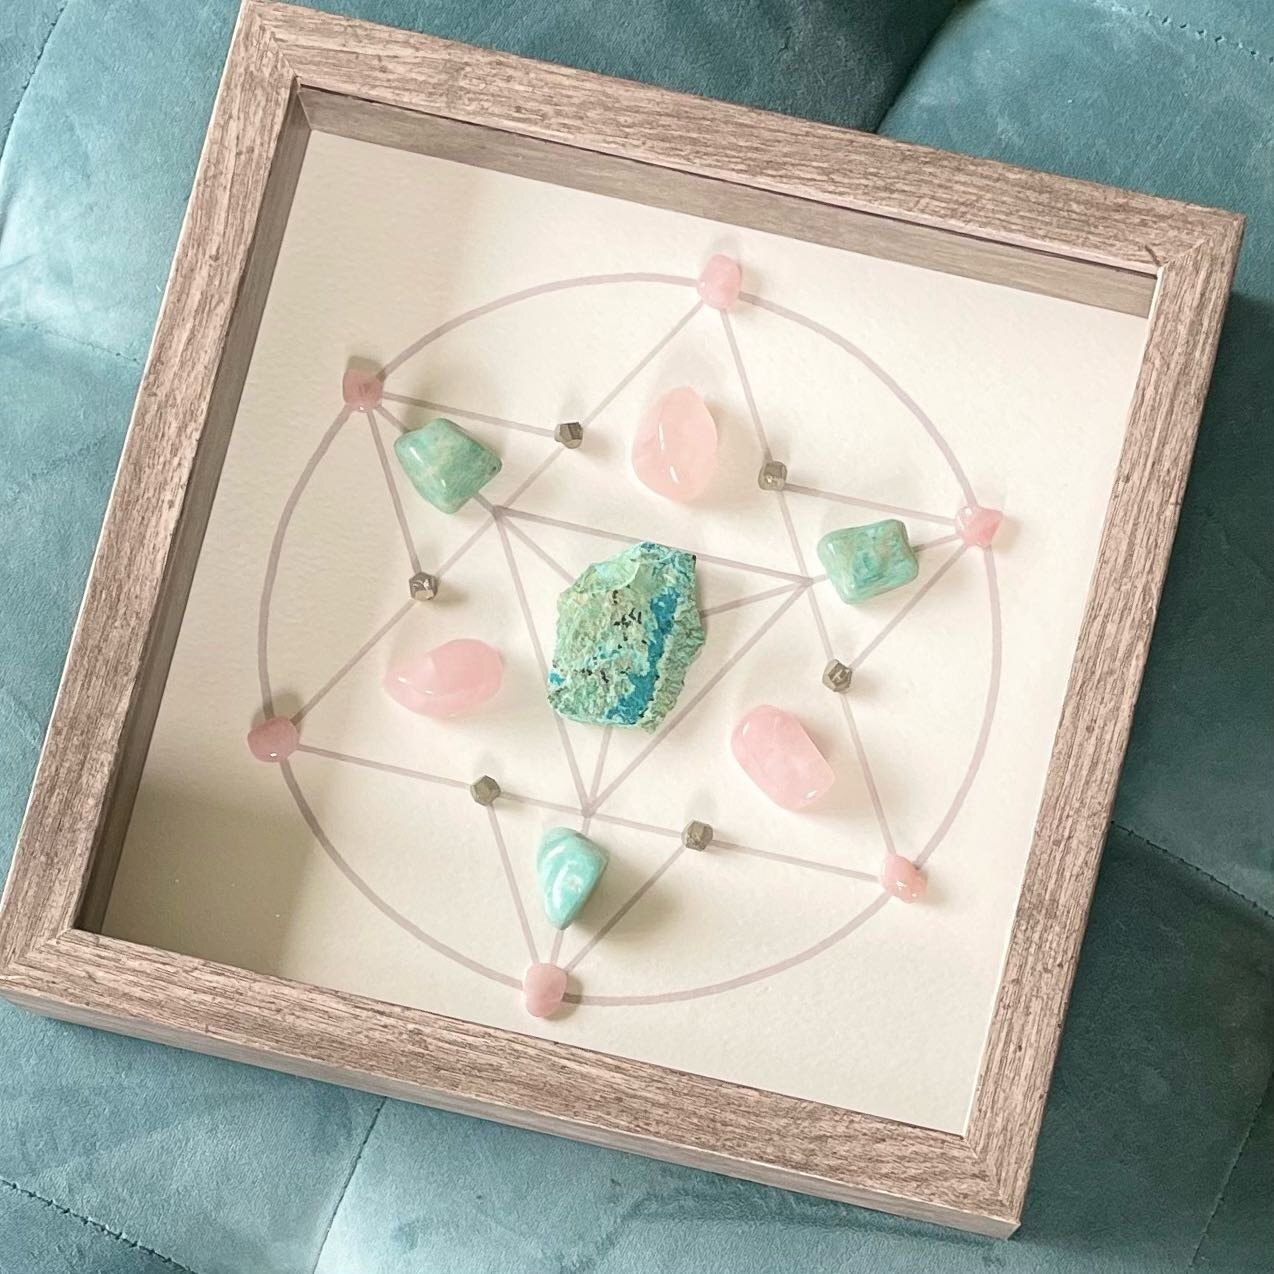 One of my new favorites, the SELF-CARE crystal grid will be at the show this weekend!!!

https://www.facebook.com/events/460238295875015

Mantra reads: I&rsquo;m a sacred being whose light shines brightest when I lovingly honor my own needs. 

Come v